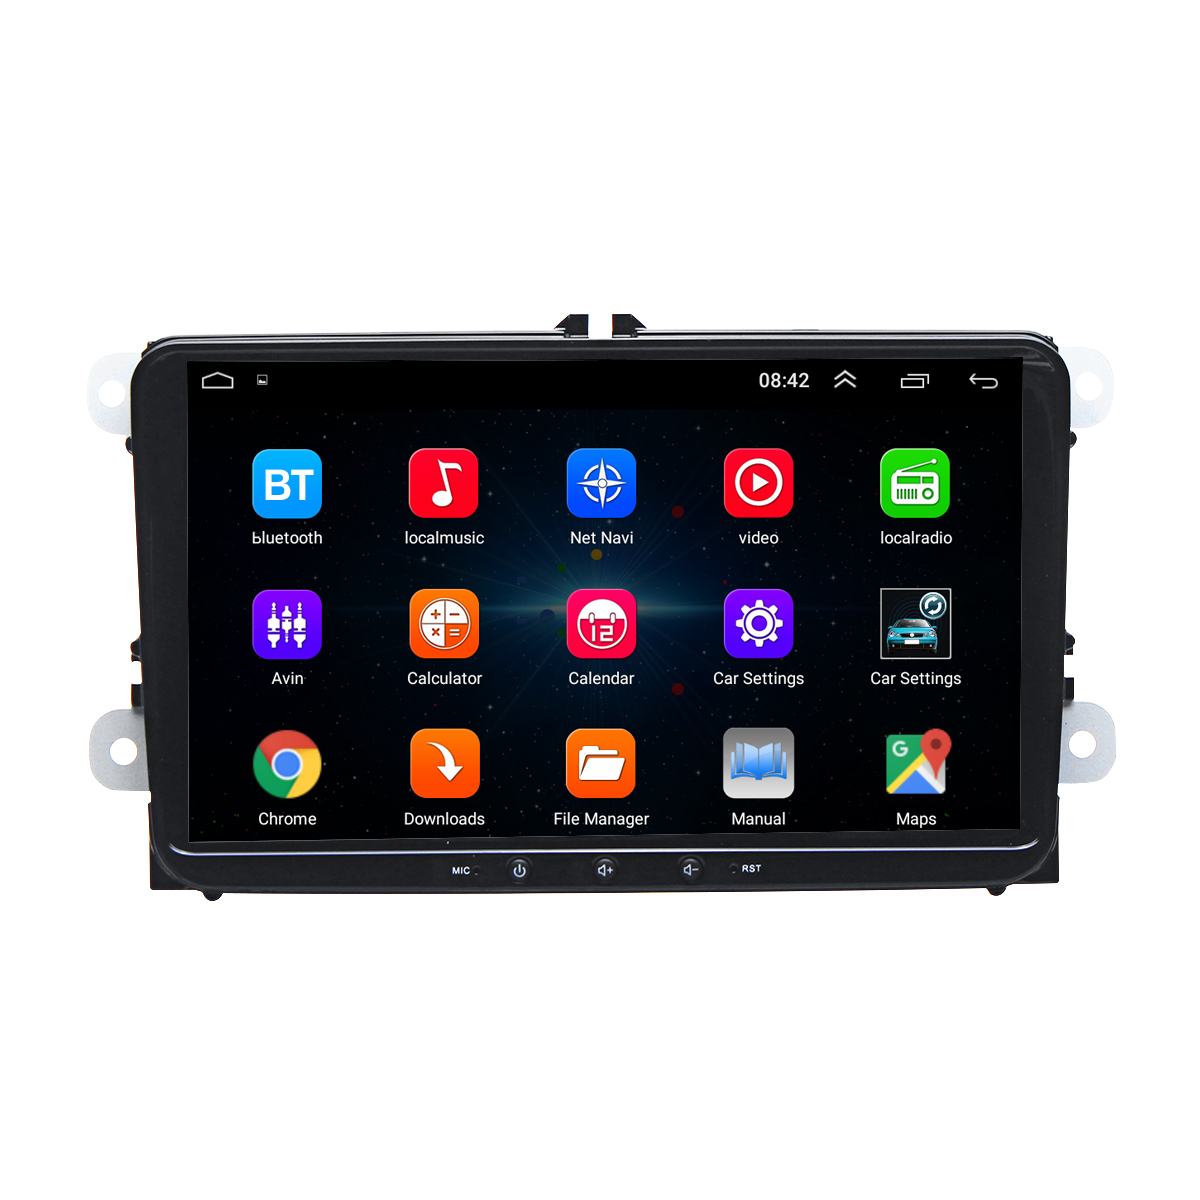 

9 Inch 2 Din for Android 8.1 Car Audio Stereo Multimedia Player Quad Core 1+16G GPS Touch Screen bluetooth Wifi FM Built-in Microphone For VW Skoda Seat